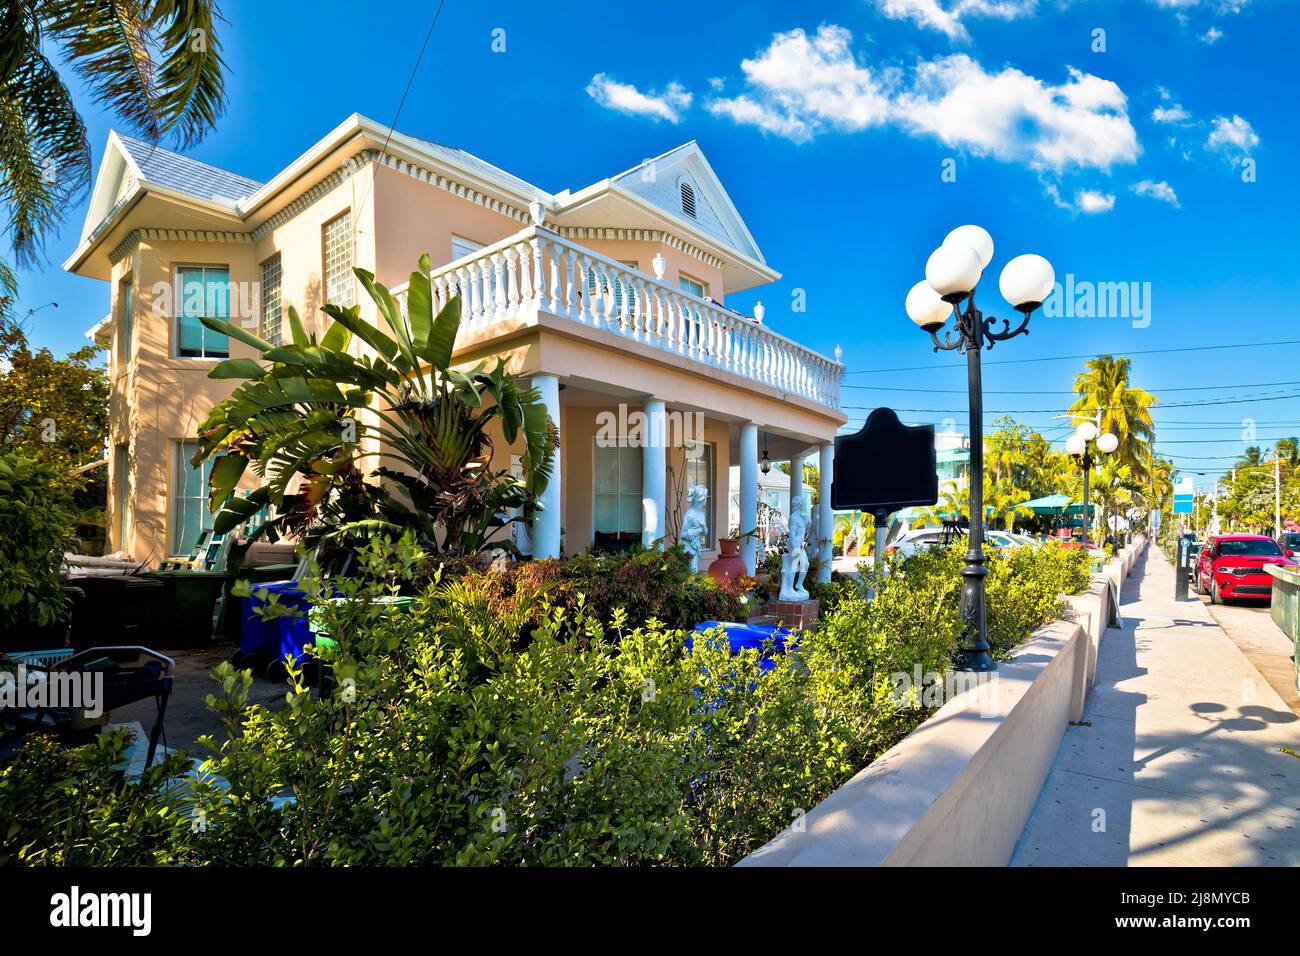 Key West street architecture view, south Florida Keys, United states of America Stock Photo